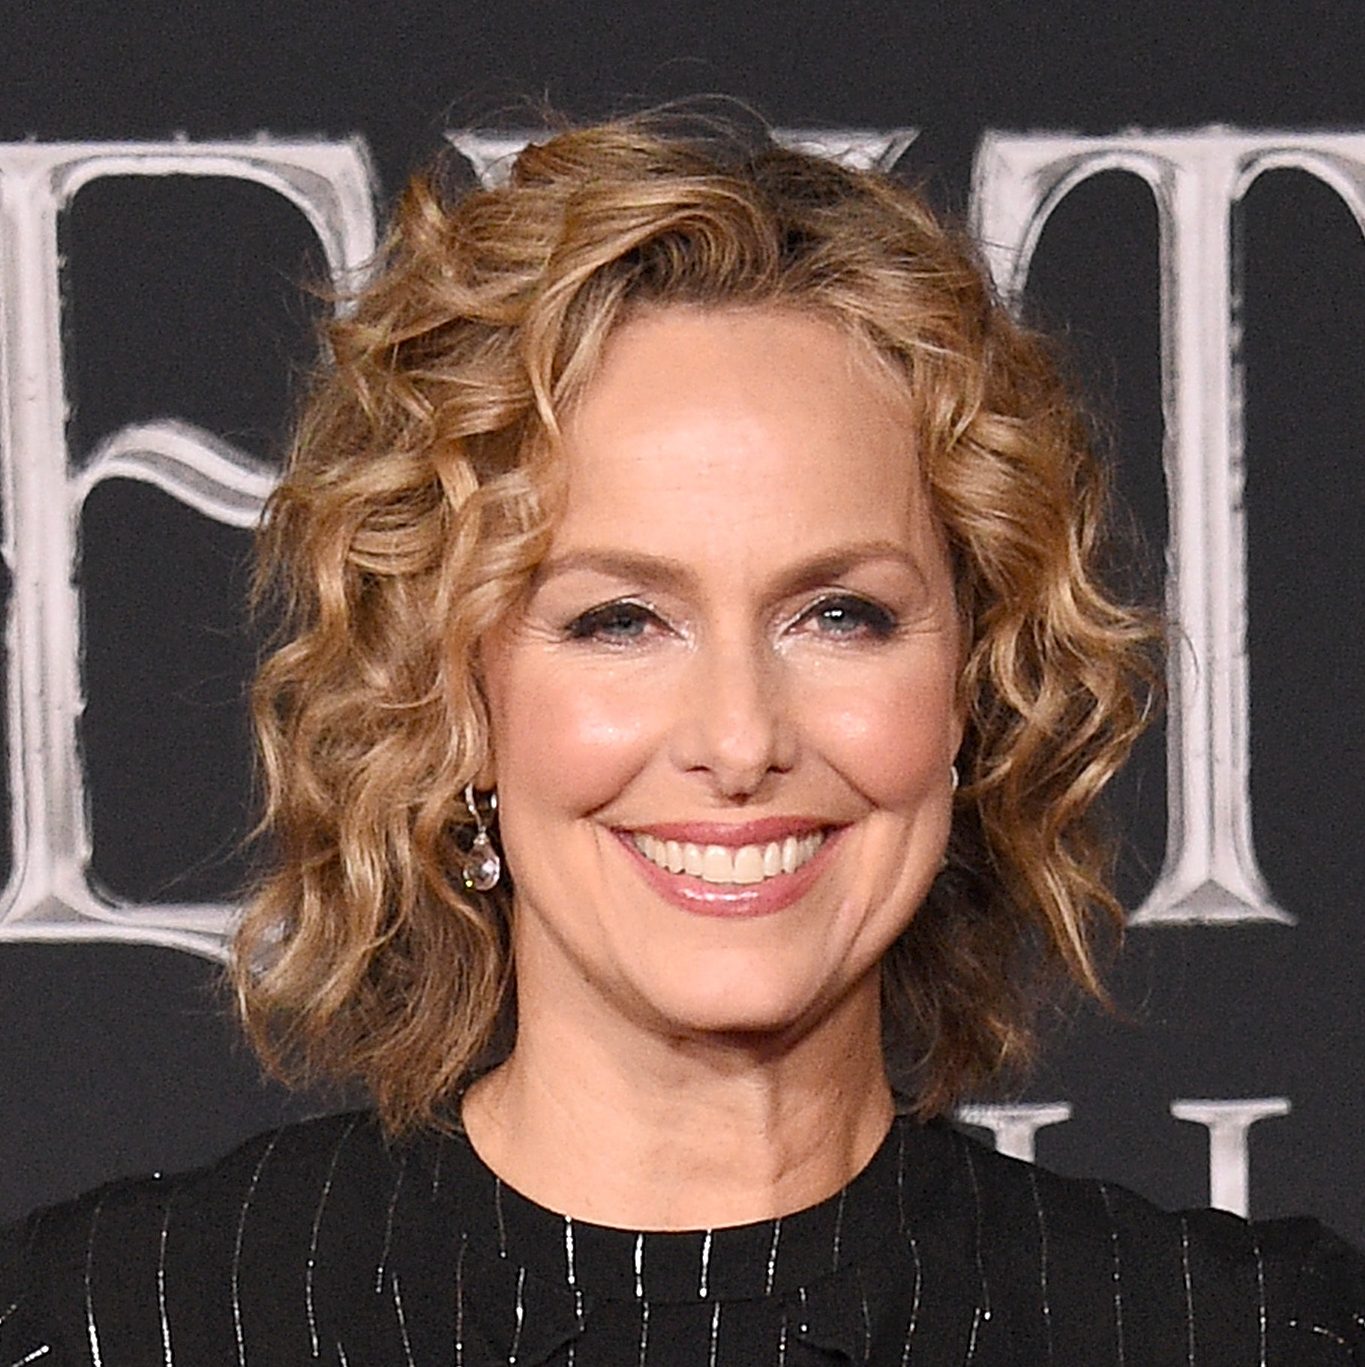 Melora Hardin smiling with curly hair